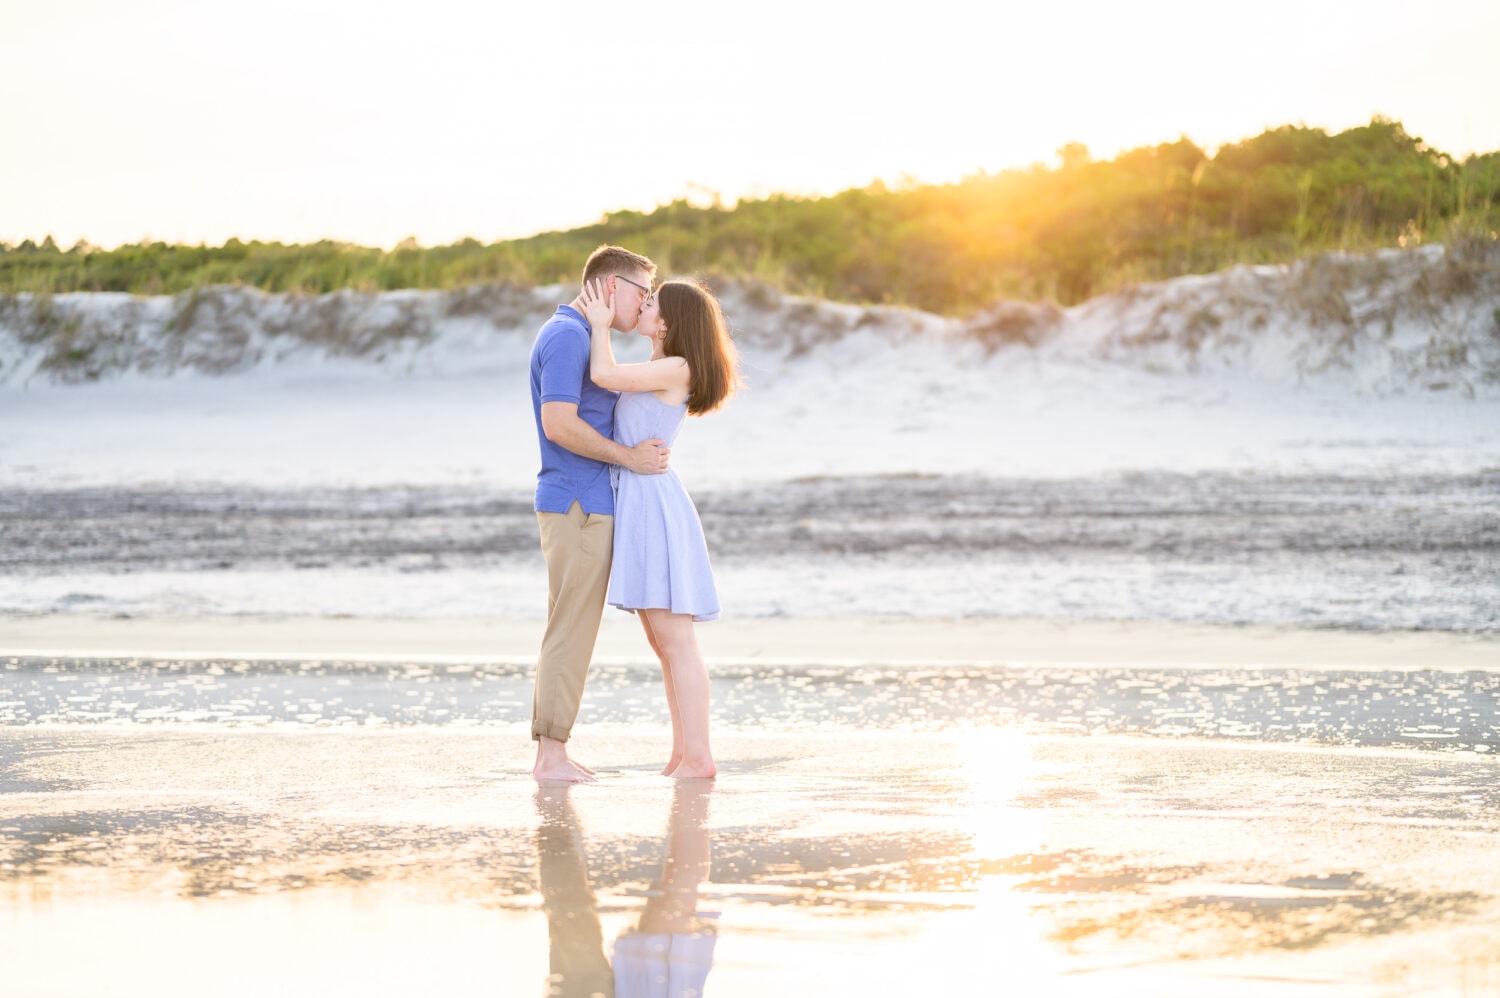 Sunset reflecting in the water for a kiss after the surprise proposal - Huntington Beach State Park